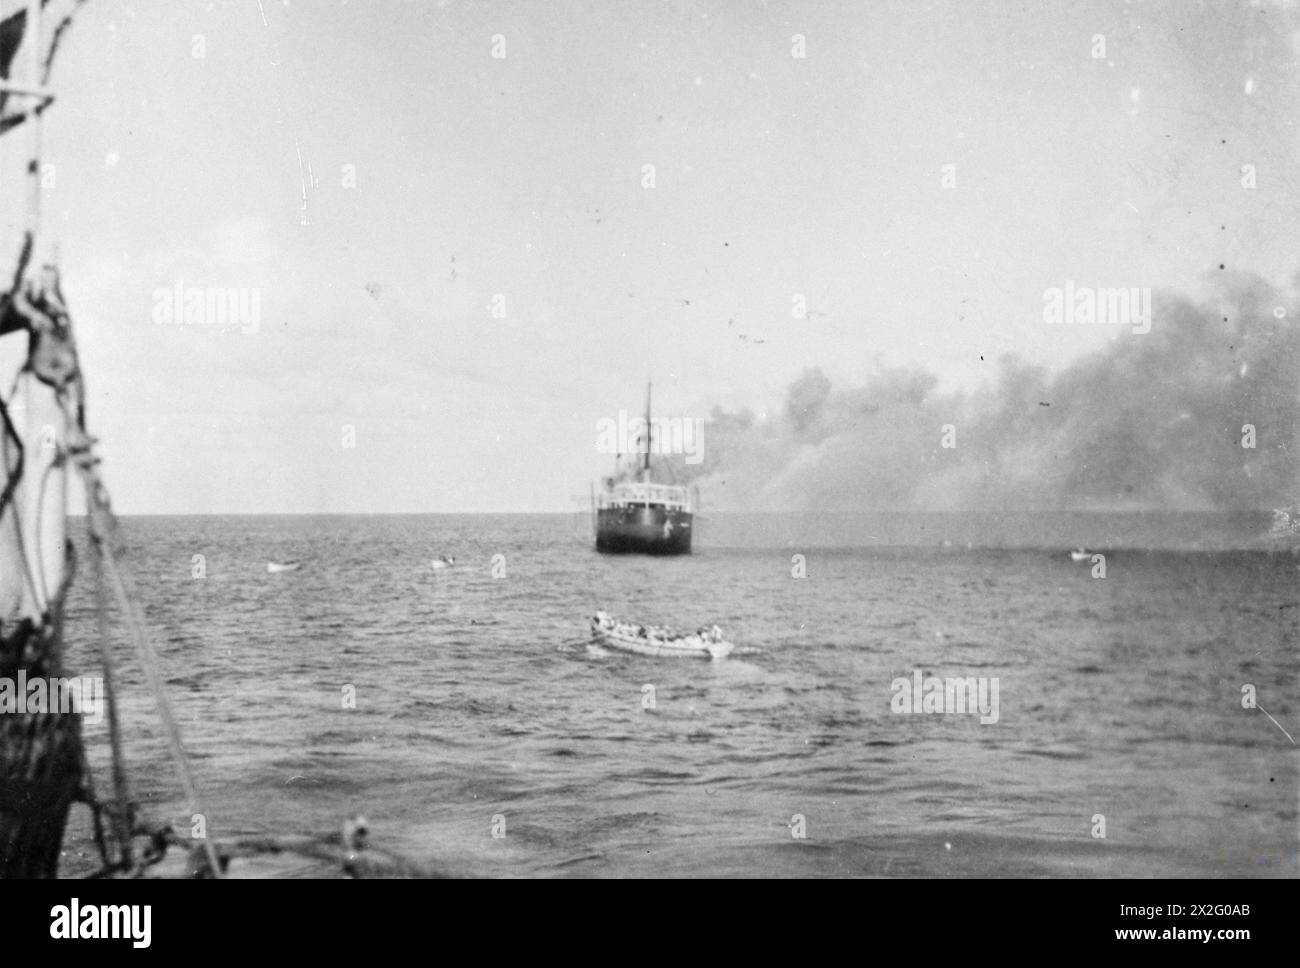 THE INTERCEPTION AND SCUTTLING OF THE GERMAN SS IDARWALD. 8 AND 9 DECEMBER 1940, ON BOARD A BRITISH WARSHIP OFF CUBA. THE GERMAN HAMBURG-AMERIKA FREIGHTER IDARWALD WAS INTERCEPTED BY A PATROLLING BRITISH WARSHIP OFF CUBA. THE GERMAN CREW AT ONCE SCUTTLED THEIR SHIP, SET FIRE TO HER, AND TOOK TO THEIR BOATS. THE BRITISH SHIP FOUGHT THE FIRE AND TOOK THE IDARWALD IN TOW, BUT SHE HAD TO BE CAST OFF SHORTLY THEREAFTER AND SANK. - The boarding vessel from the British warship is pulling towards the burning and sinking freighter Stock Photo